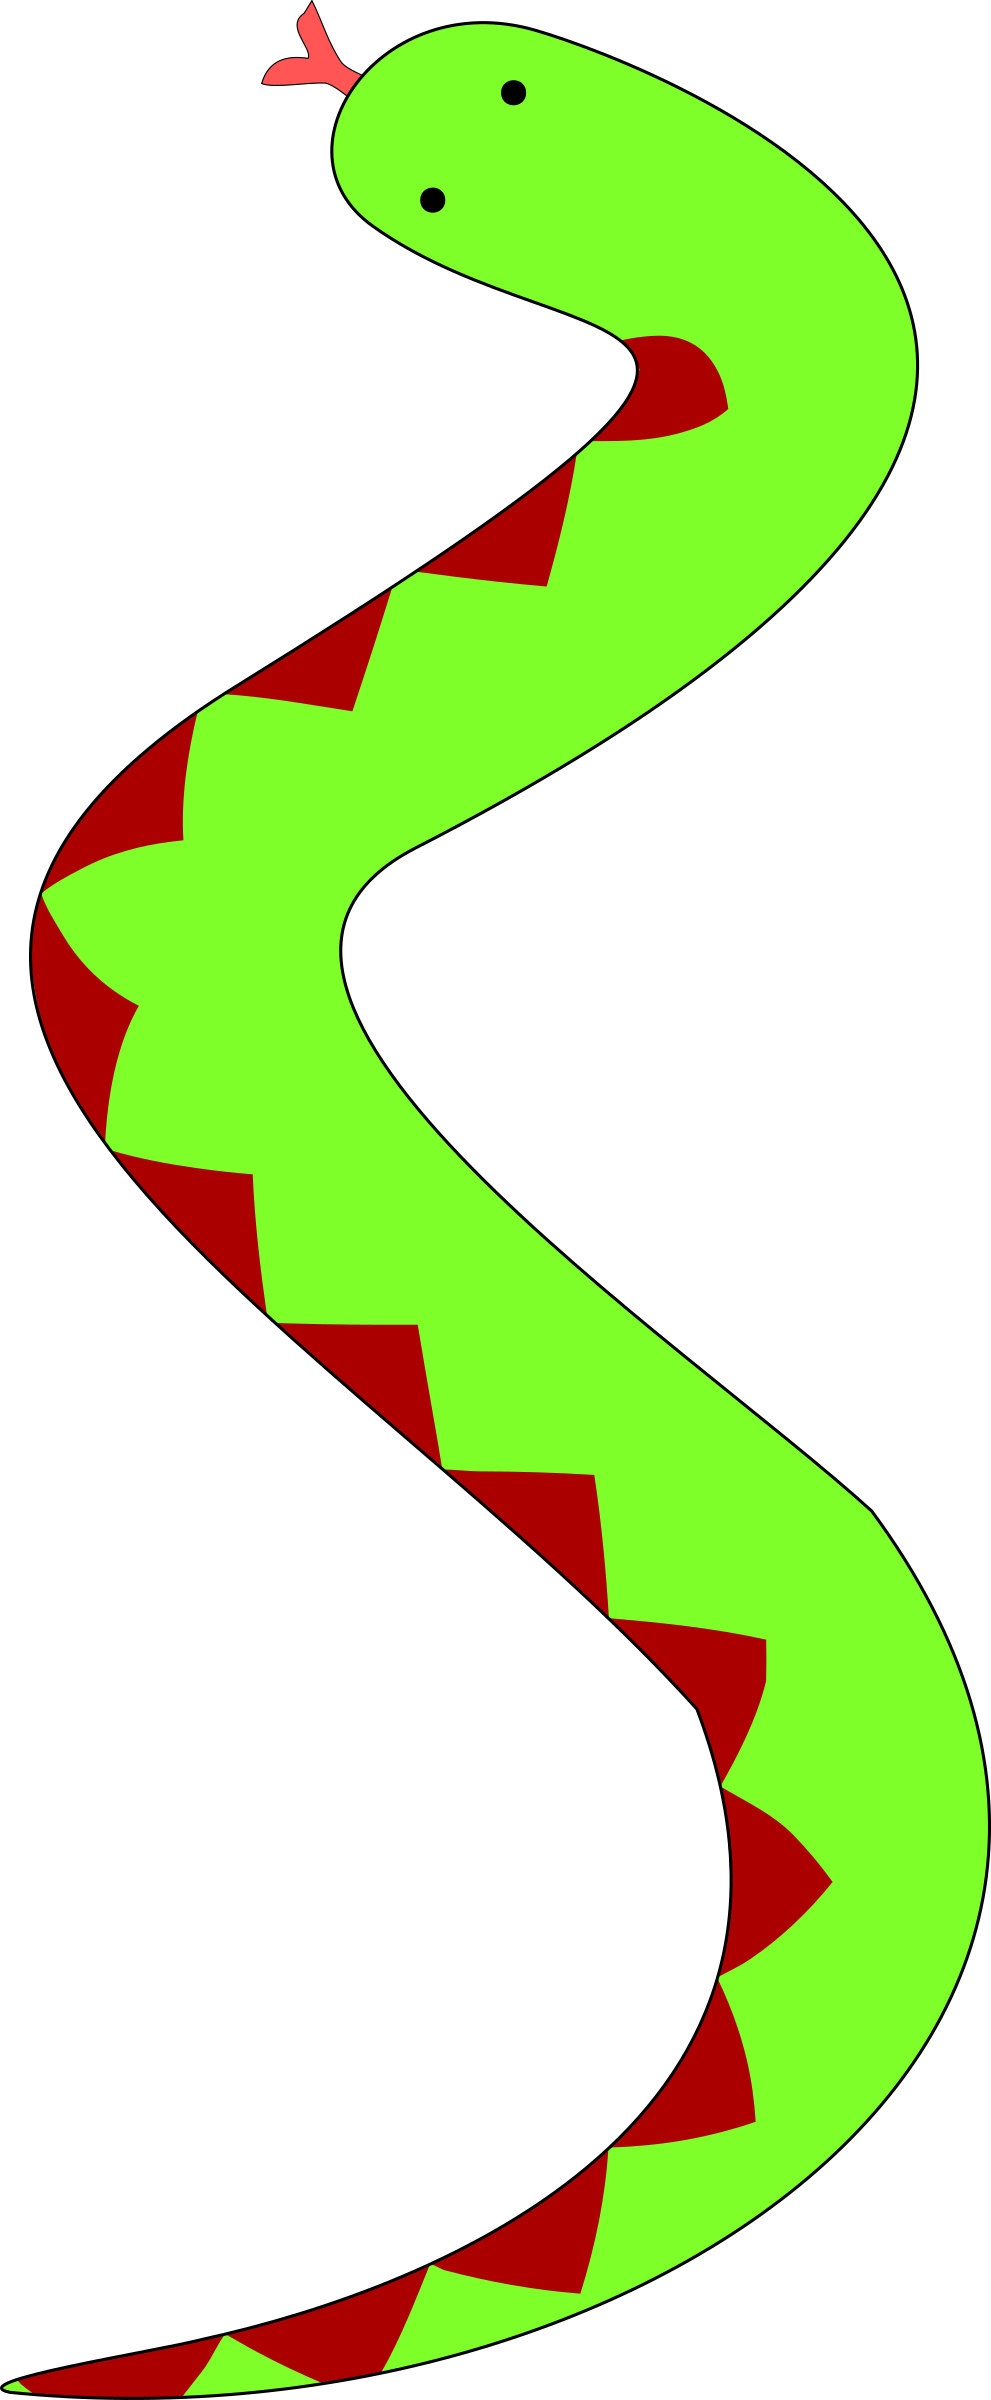 Snake clipart snake ladder. Green with red belly